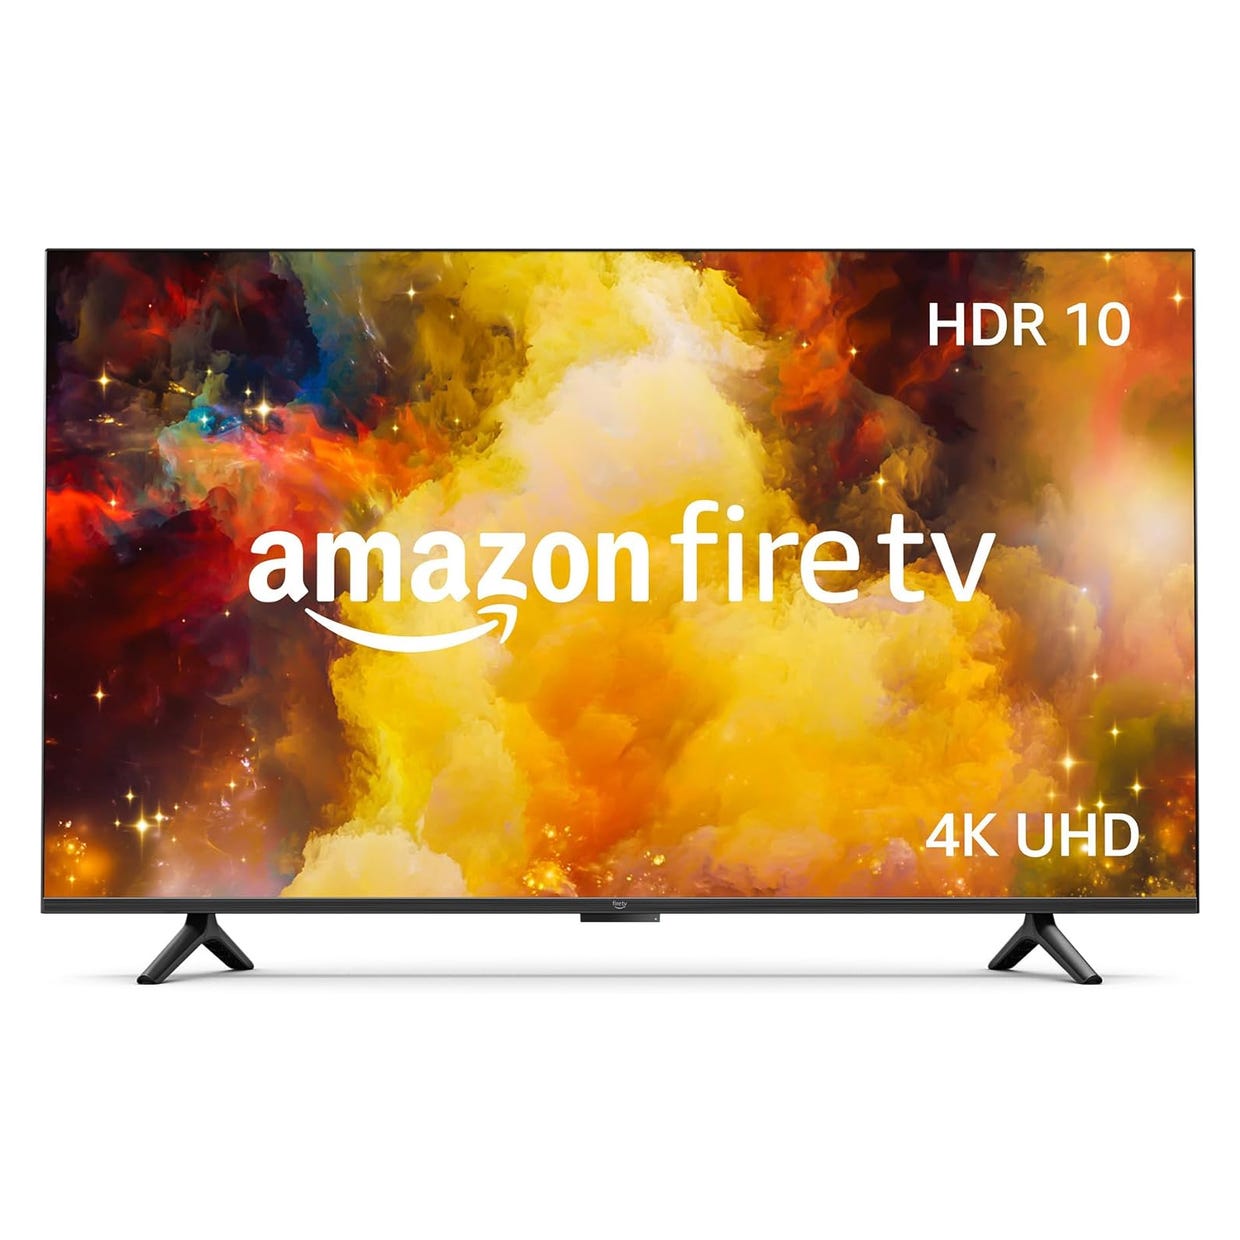 Amazon Fire TV with HDR10 and 4K UHD display.